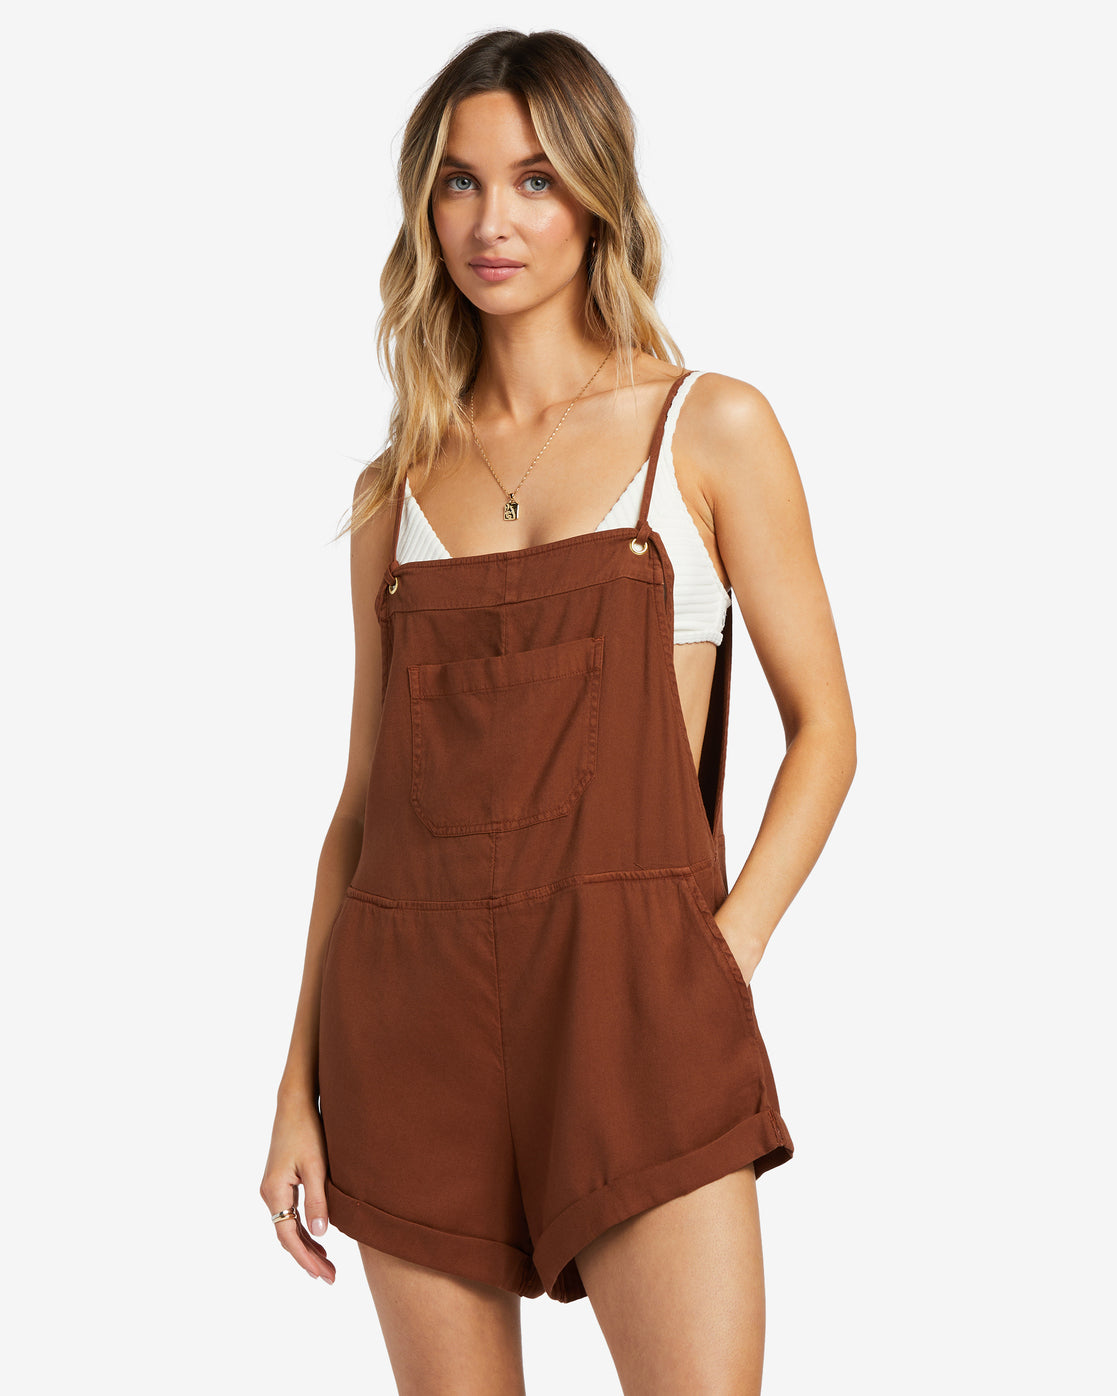 Billabong Wild Pursuit Romper - Toasted Coconut